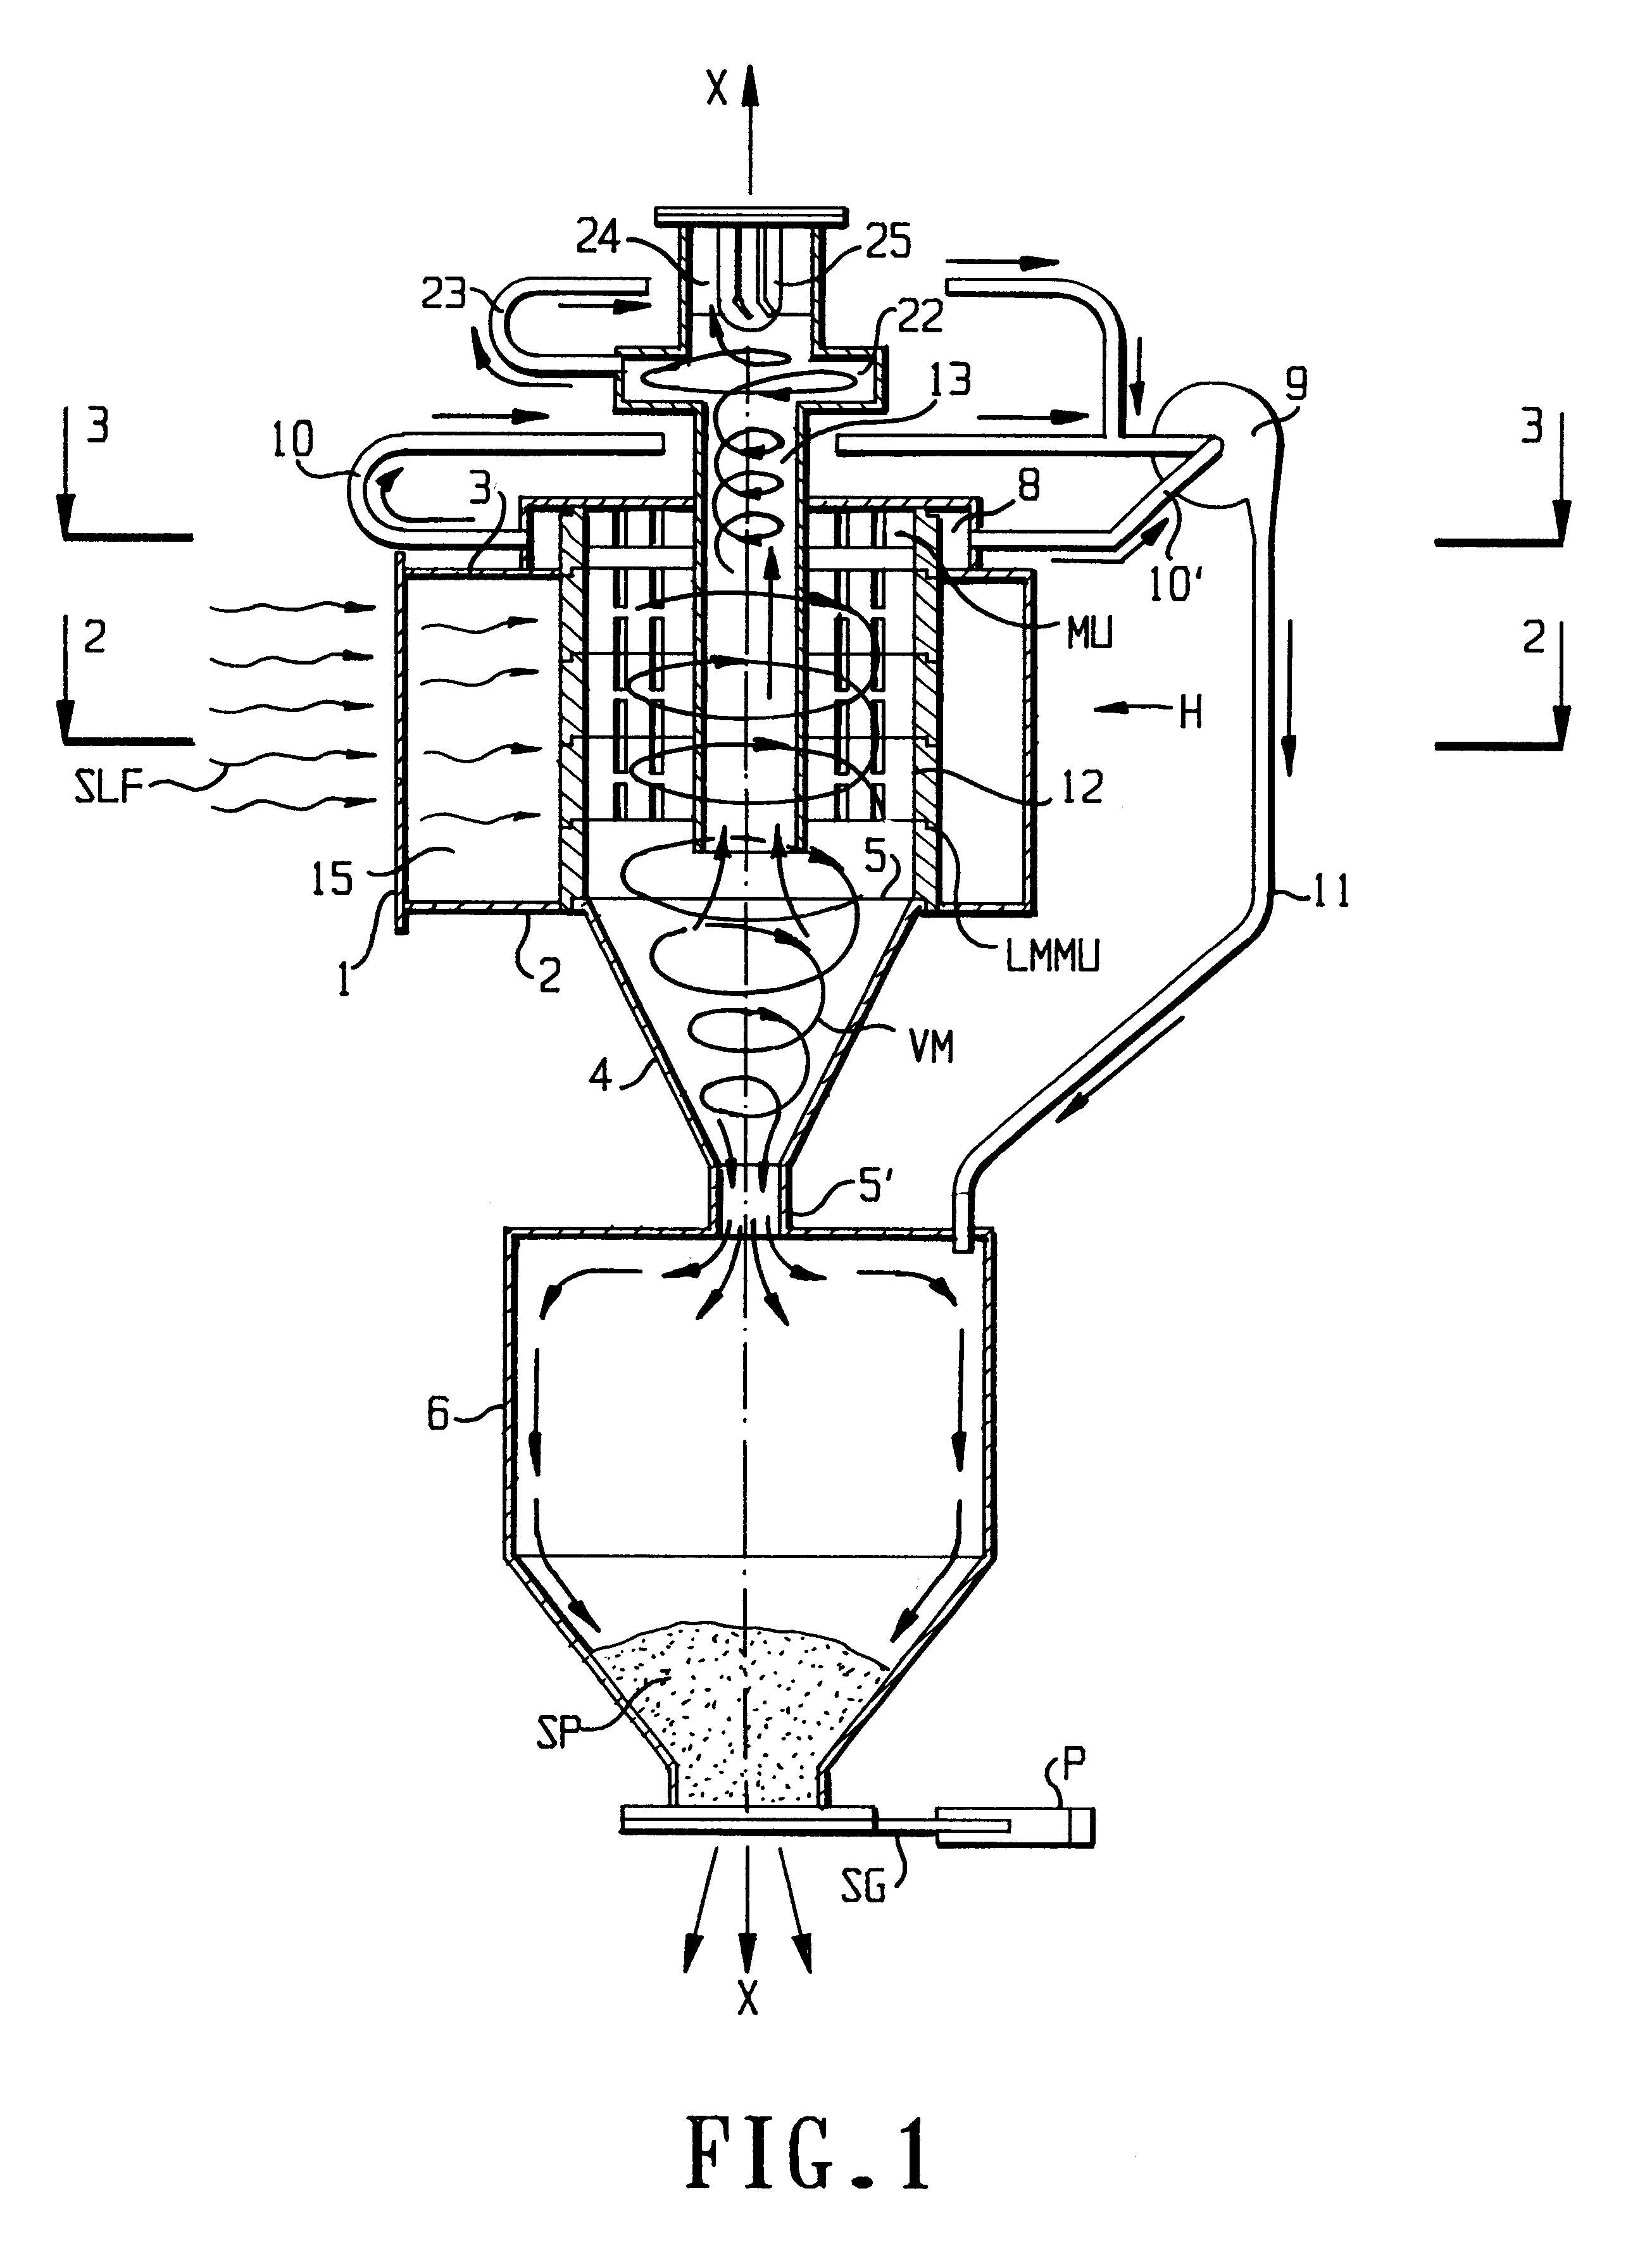 Cyclone separator having a tubular member with slit-like openings surrounding a central outlet pipe